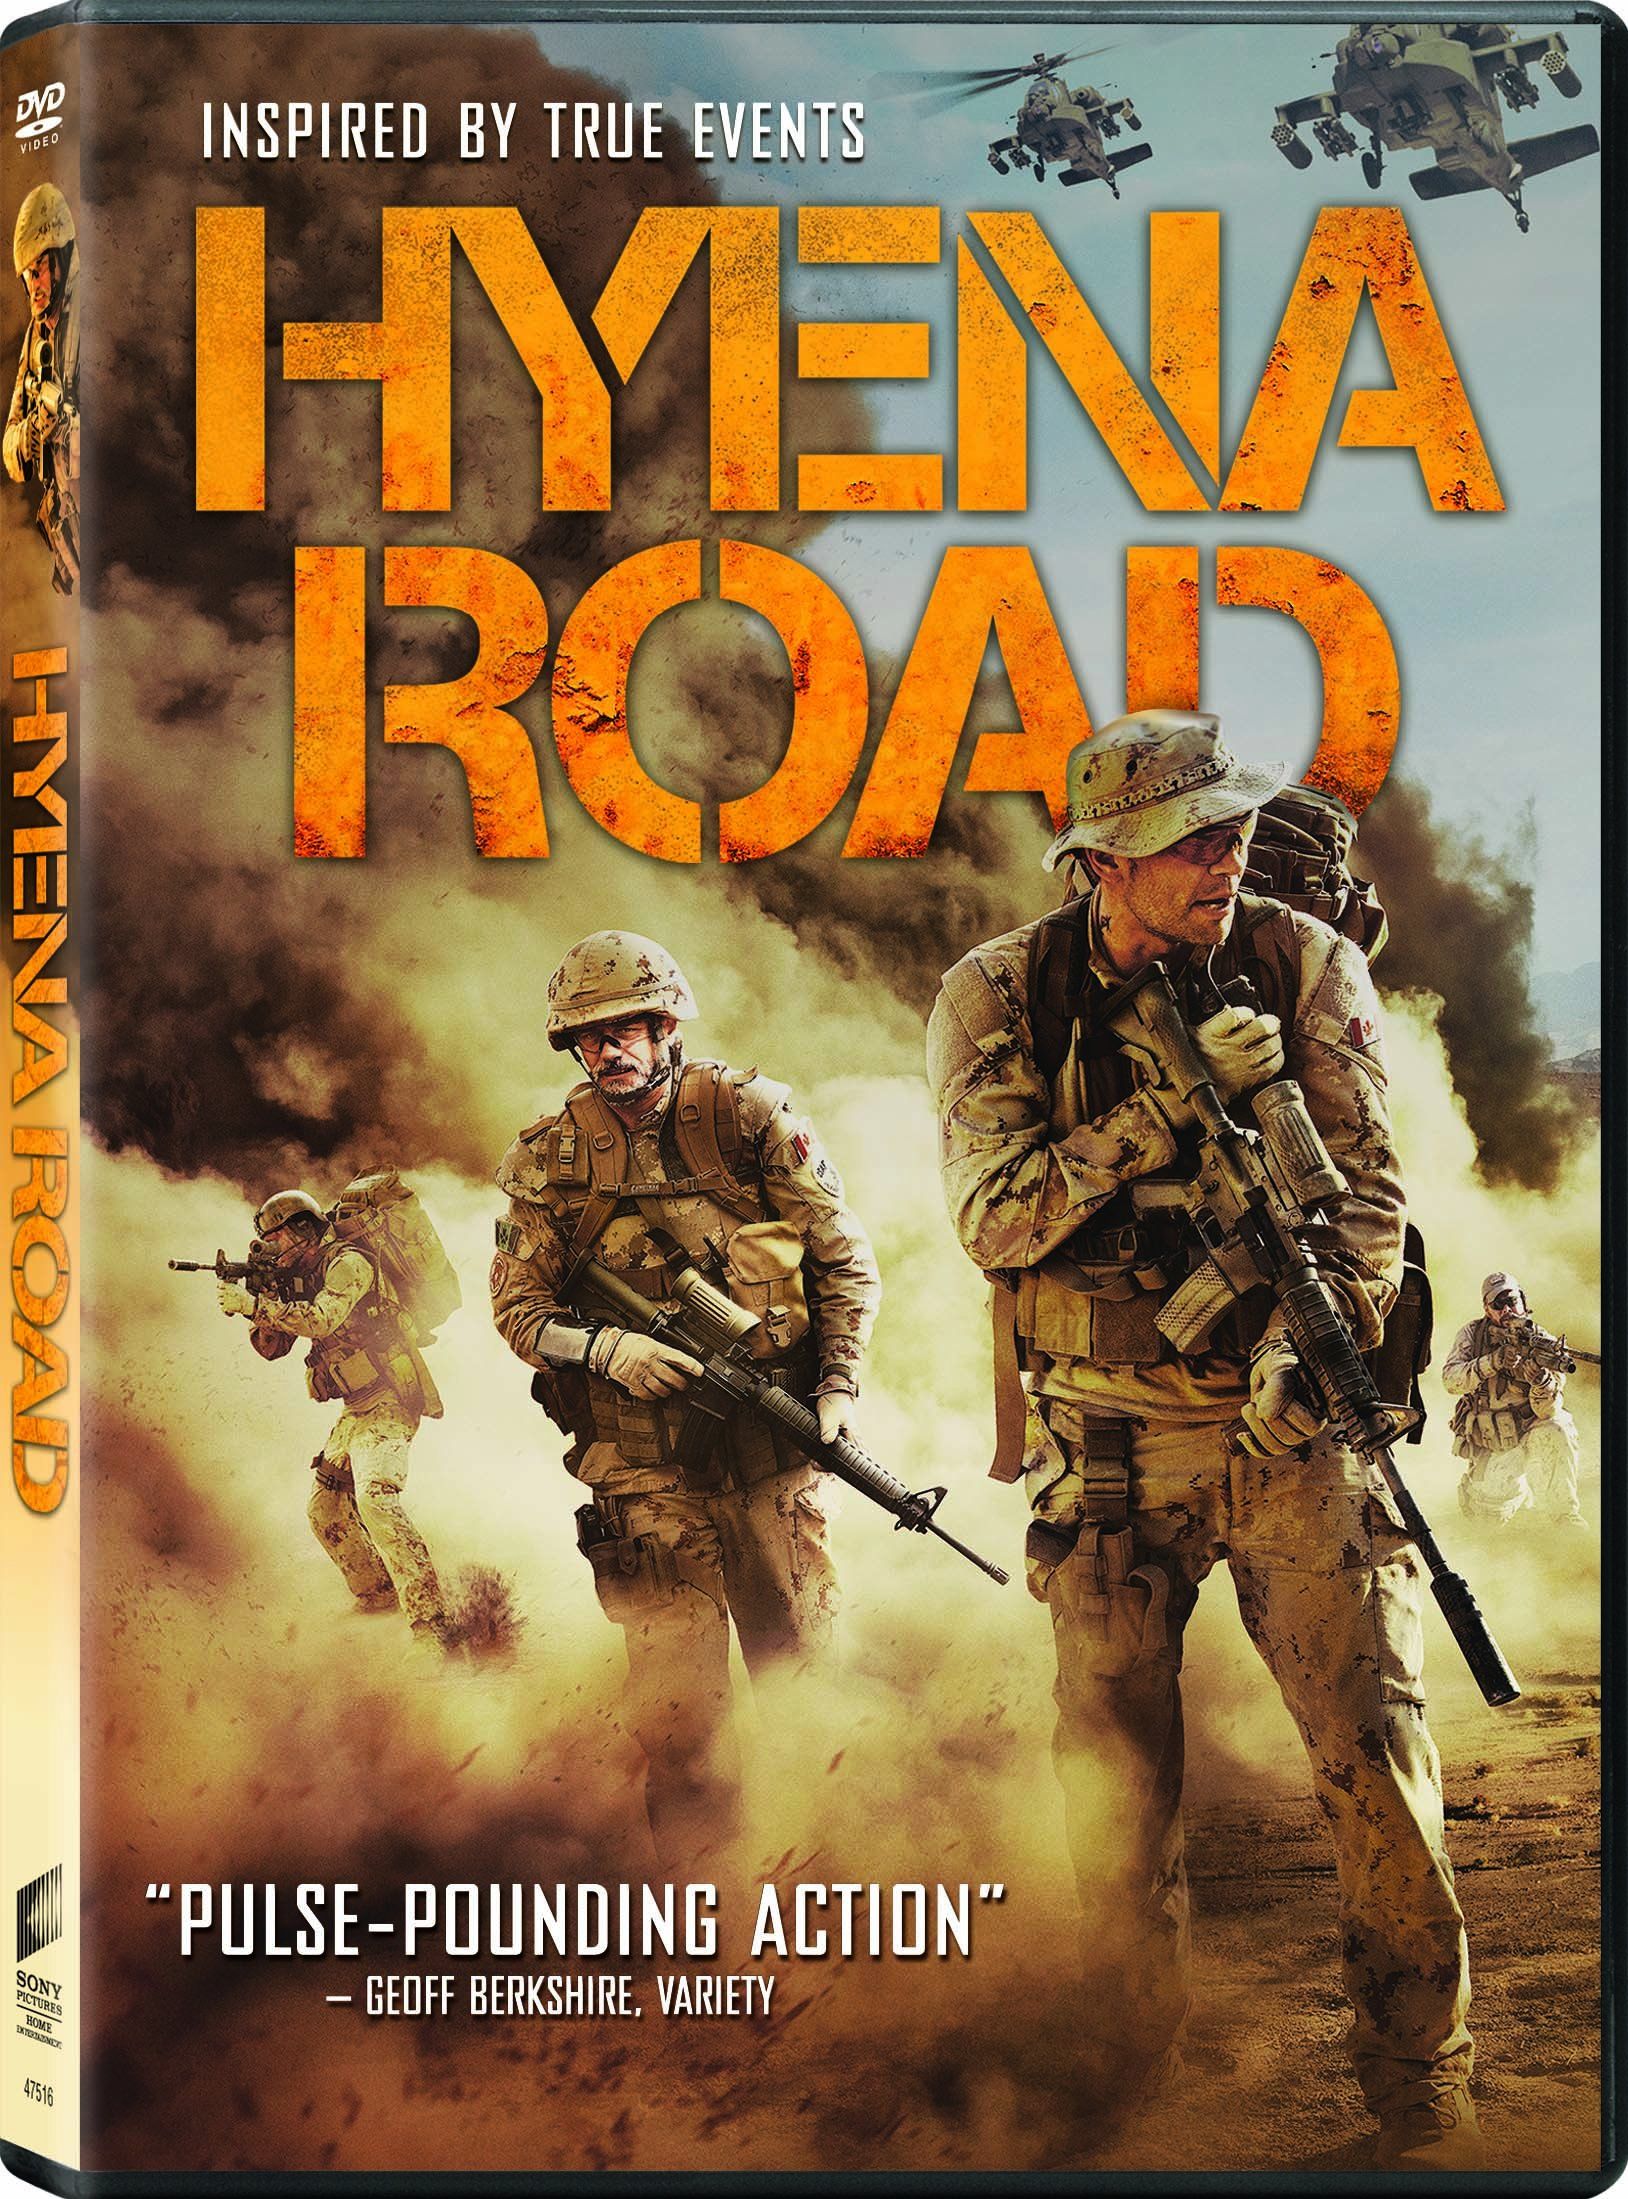 Hyena Road DVD Release Date May 3, 2016